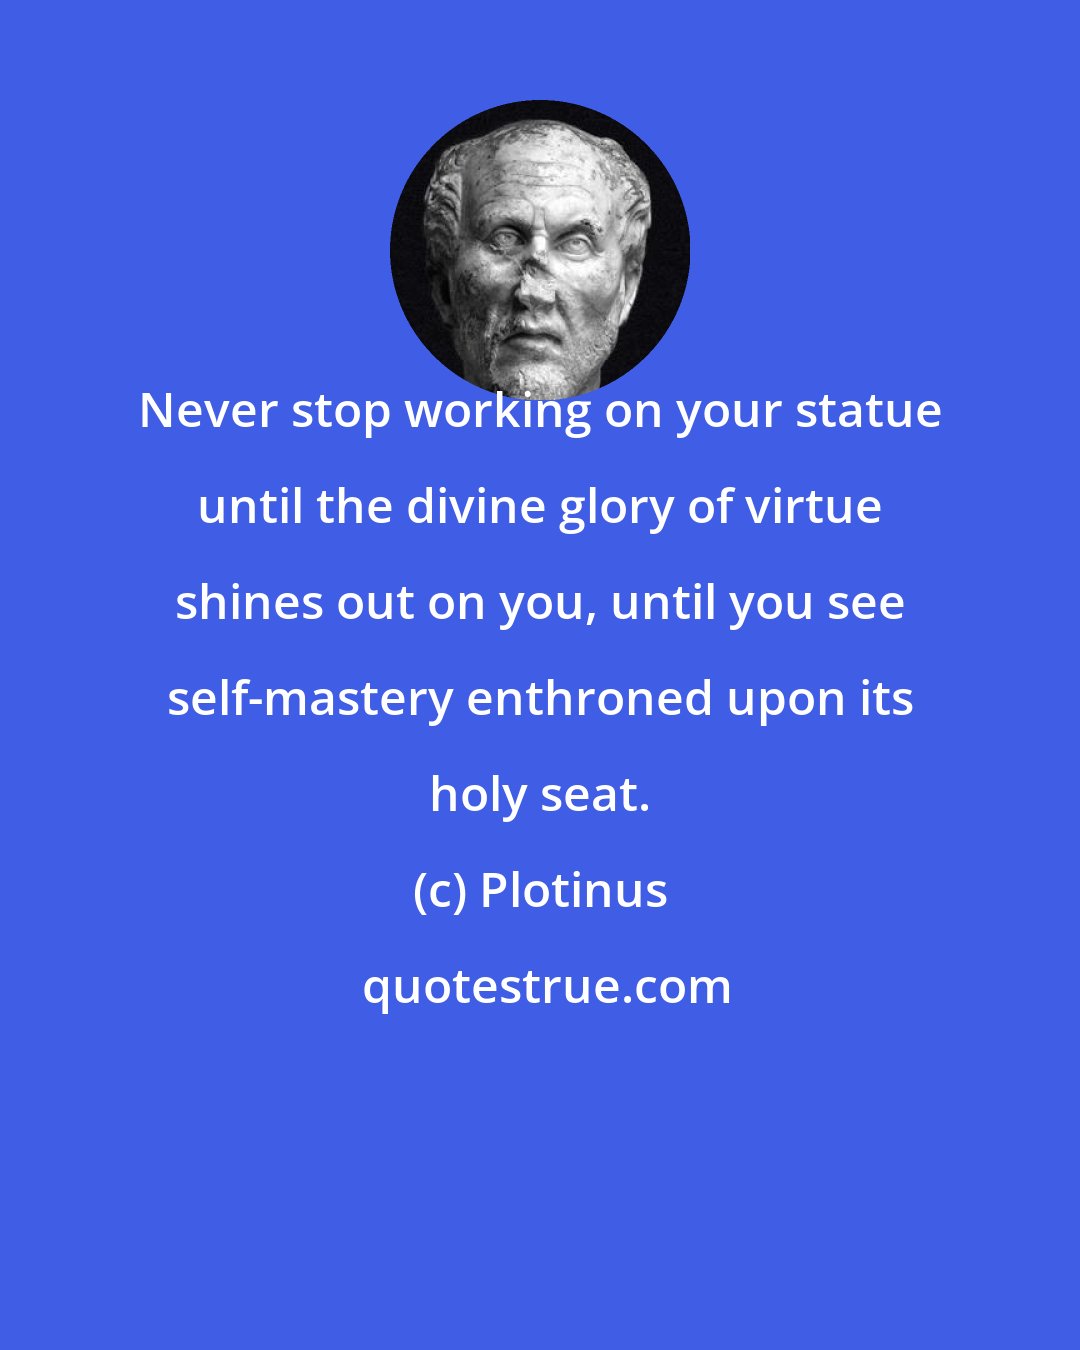 Plotinus: Never stop working on your statue until the divine glory of virtue shines out on you, until you see self-mastery enthroned upon its holy seat.